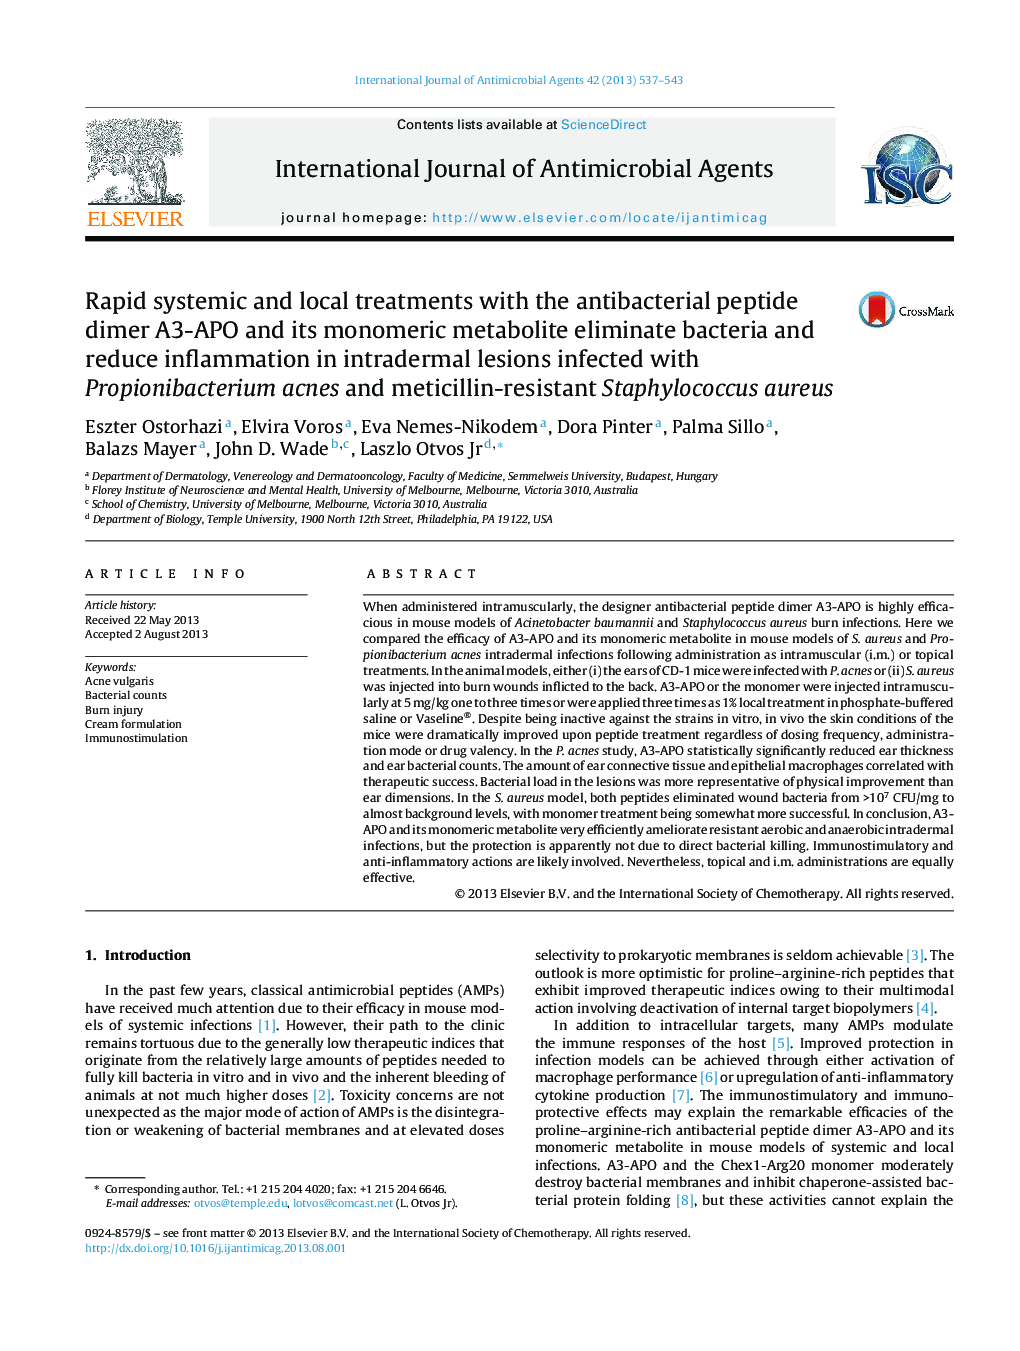 Rapid systemic and local treatments with the antibacterial peptide dimer A3-APO and its monomeric metabolite eliminate bacteria and reduce inflammation in intradermal lesions infected with Propionibacterium acnes and meticillin-resistant Staphylococcus au